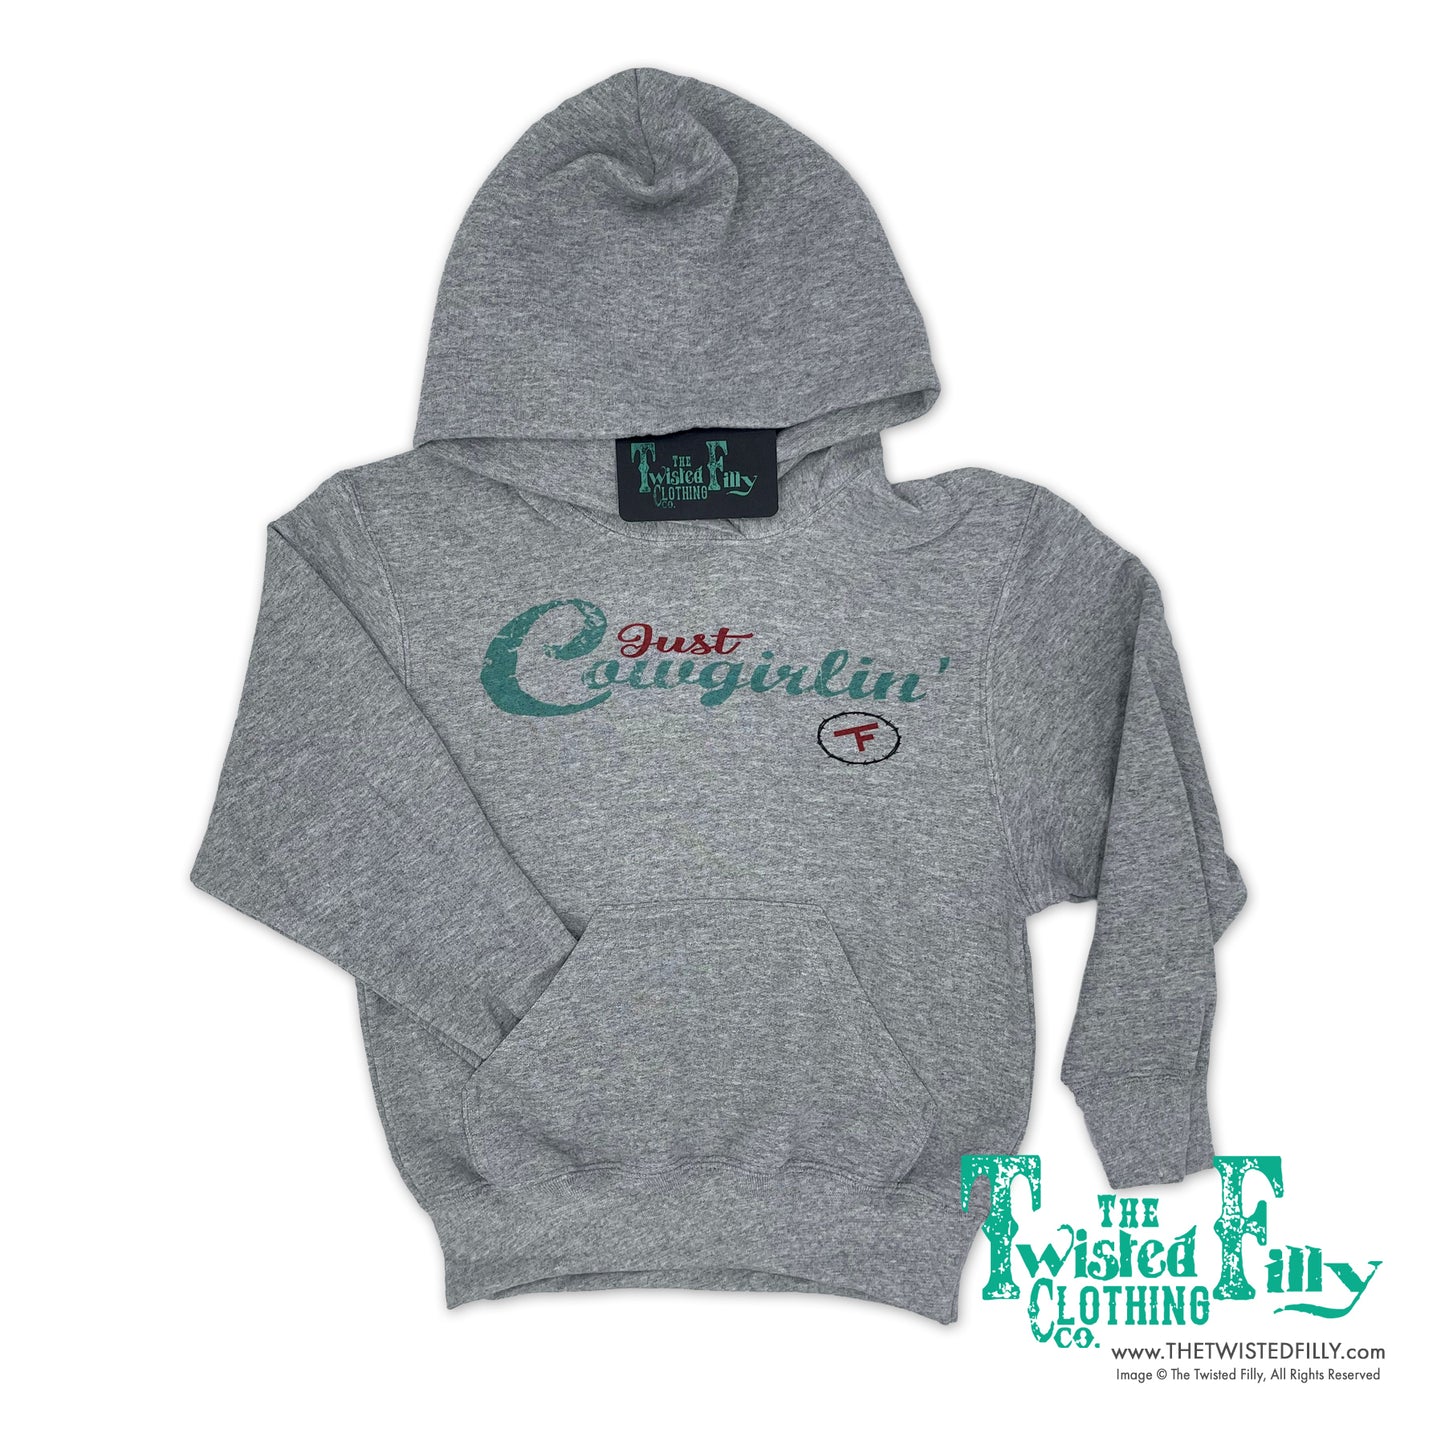 Just Cowgirlin' - Toddler Hoodie - Gray